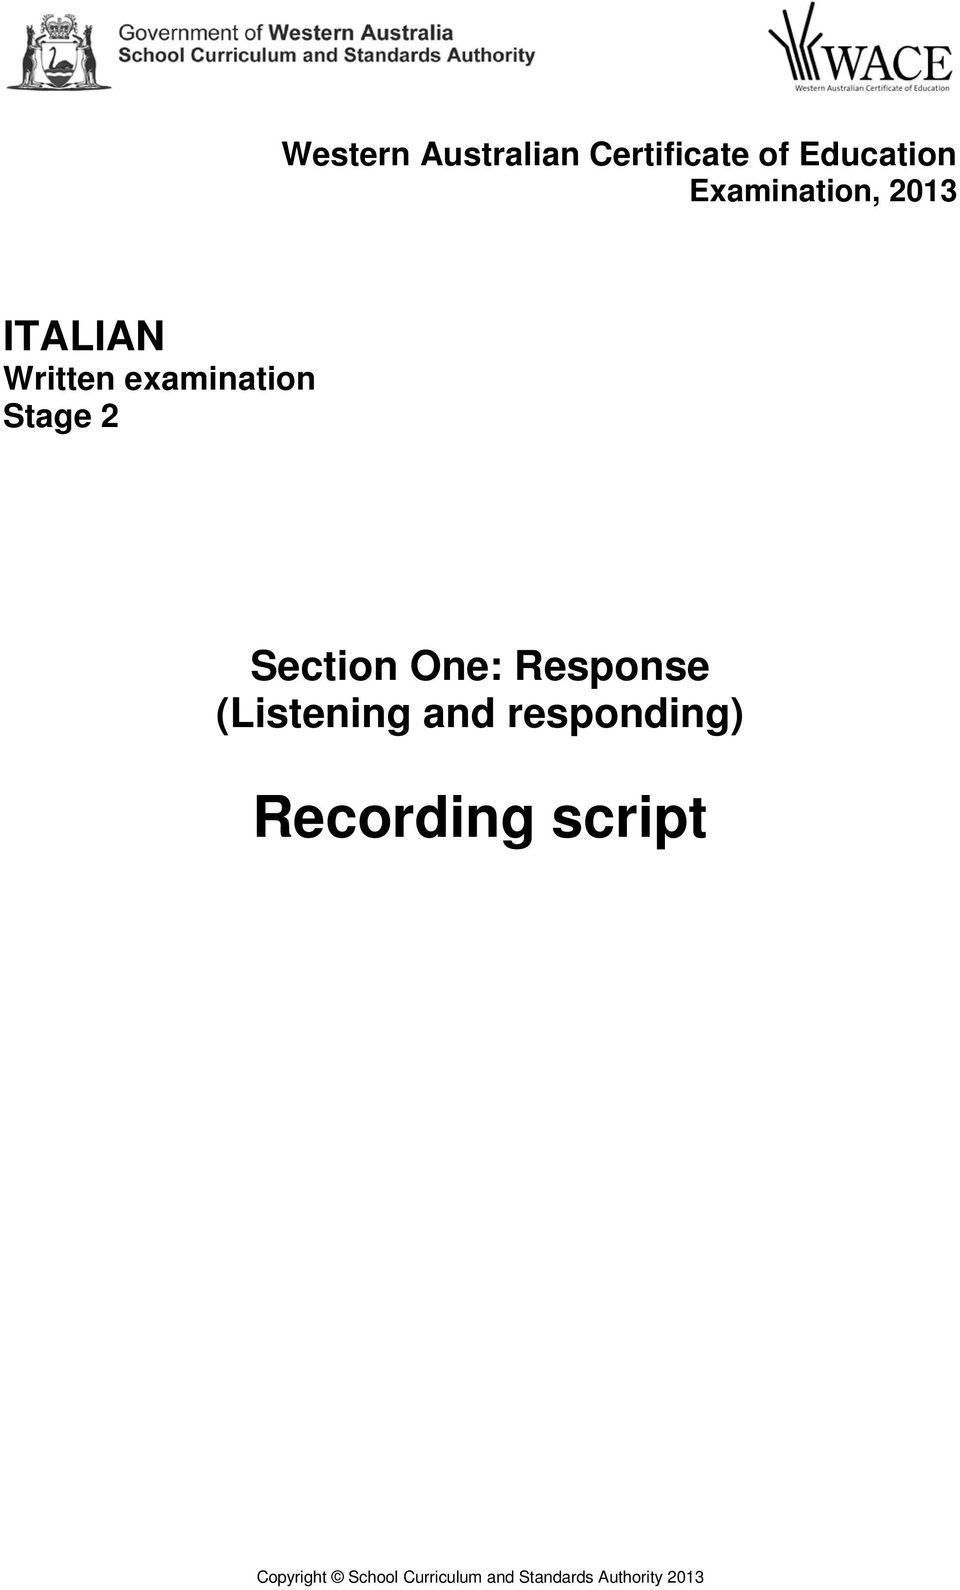 Section One: Response (Listening and responding)